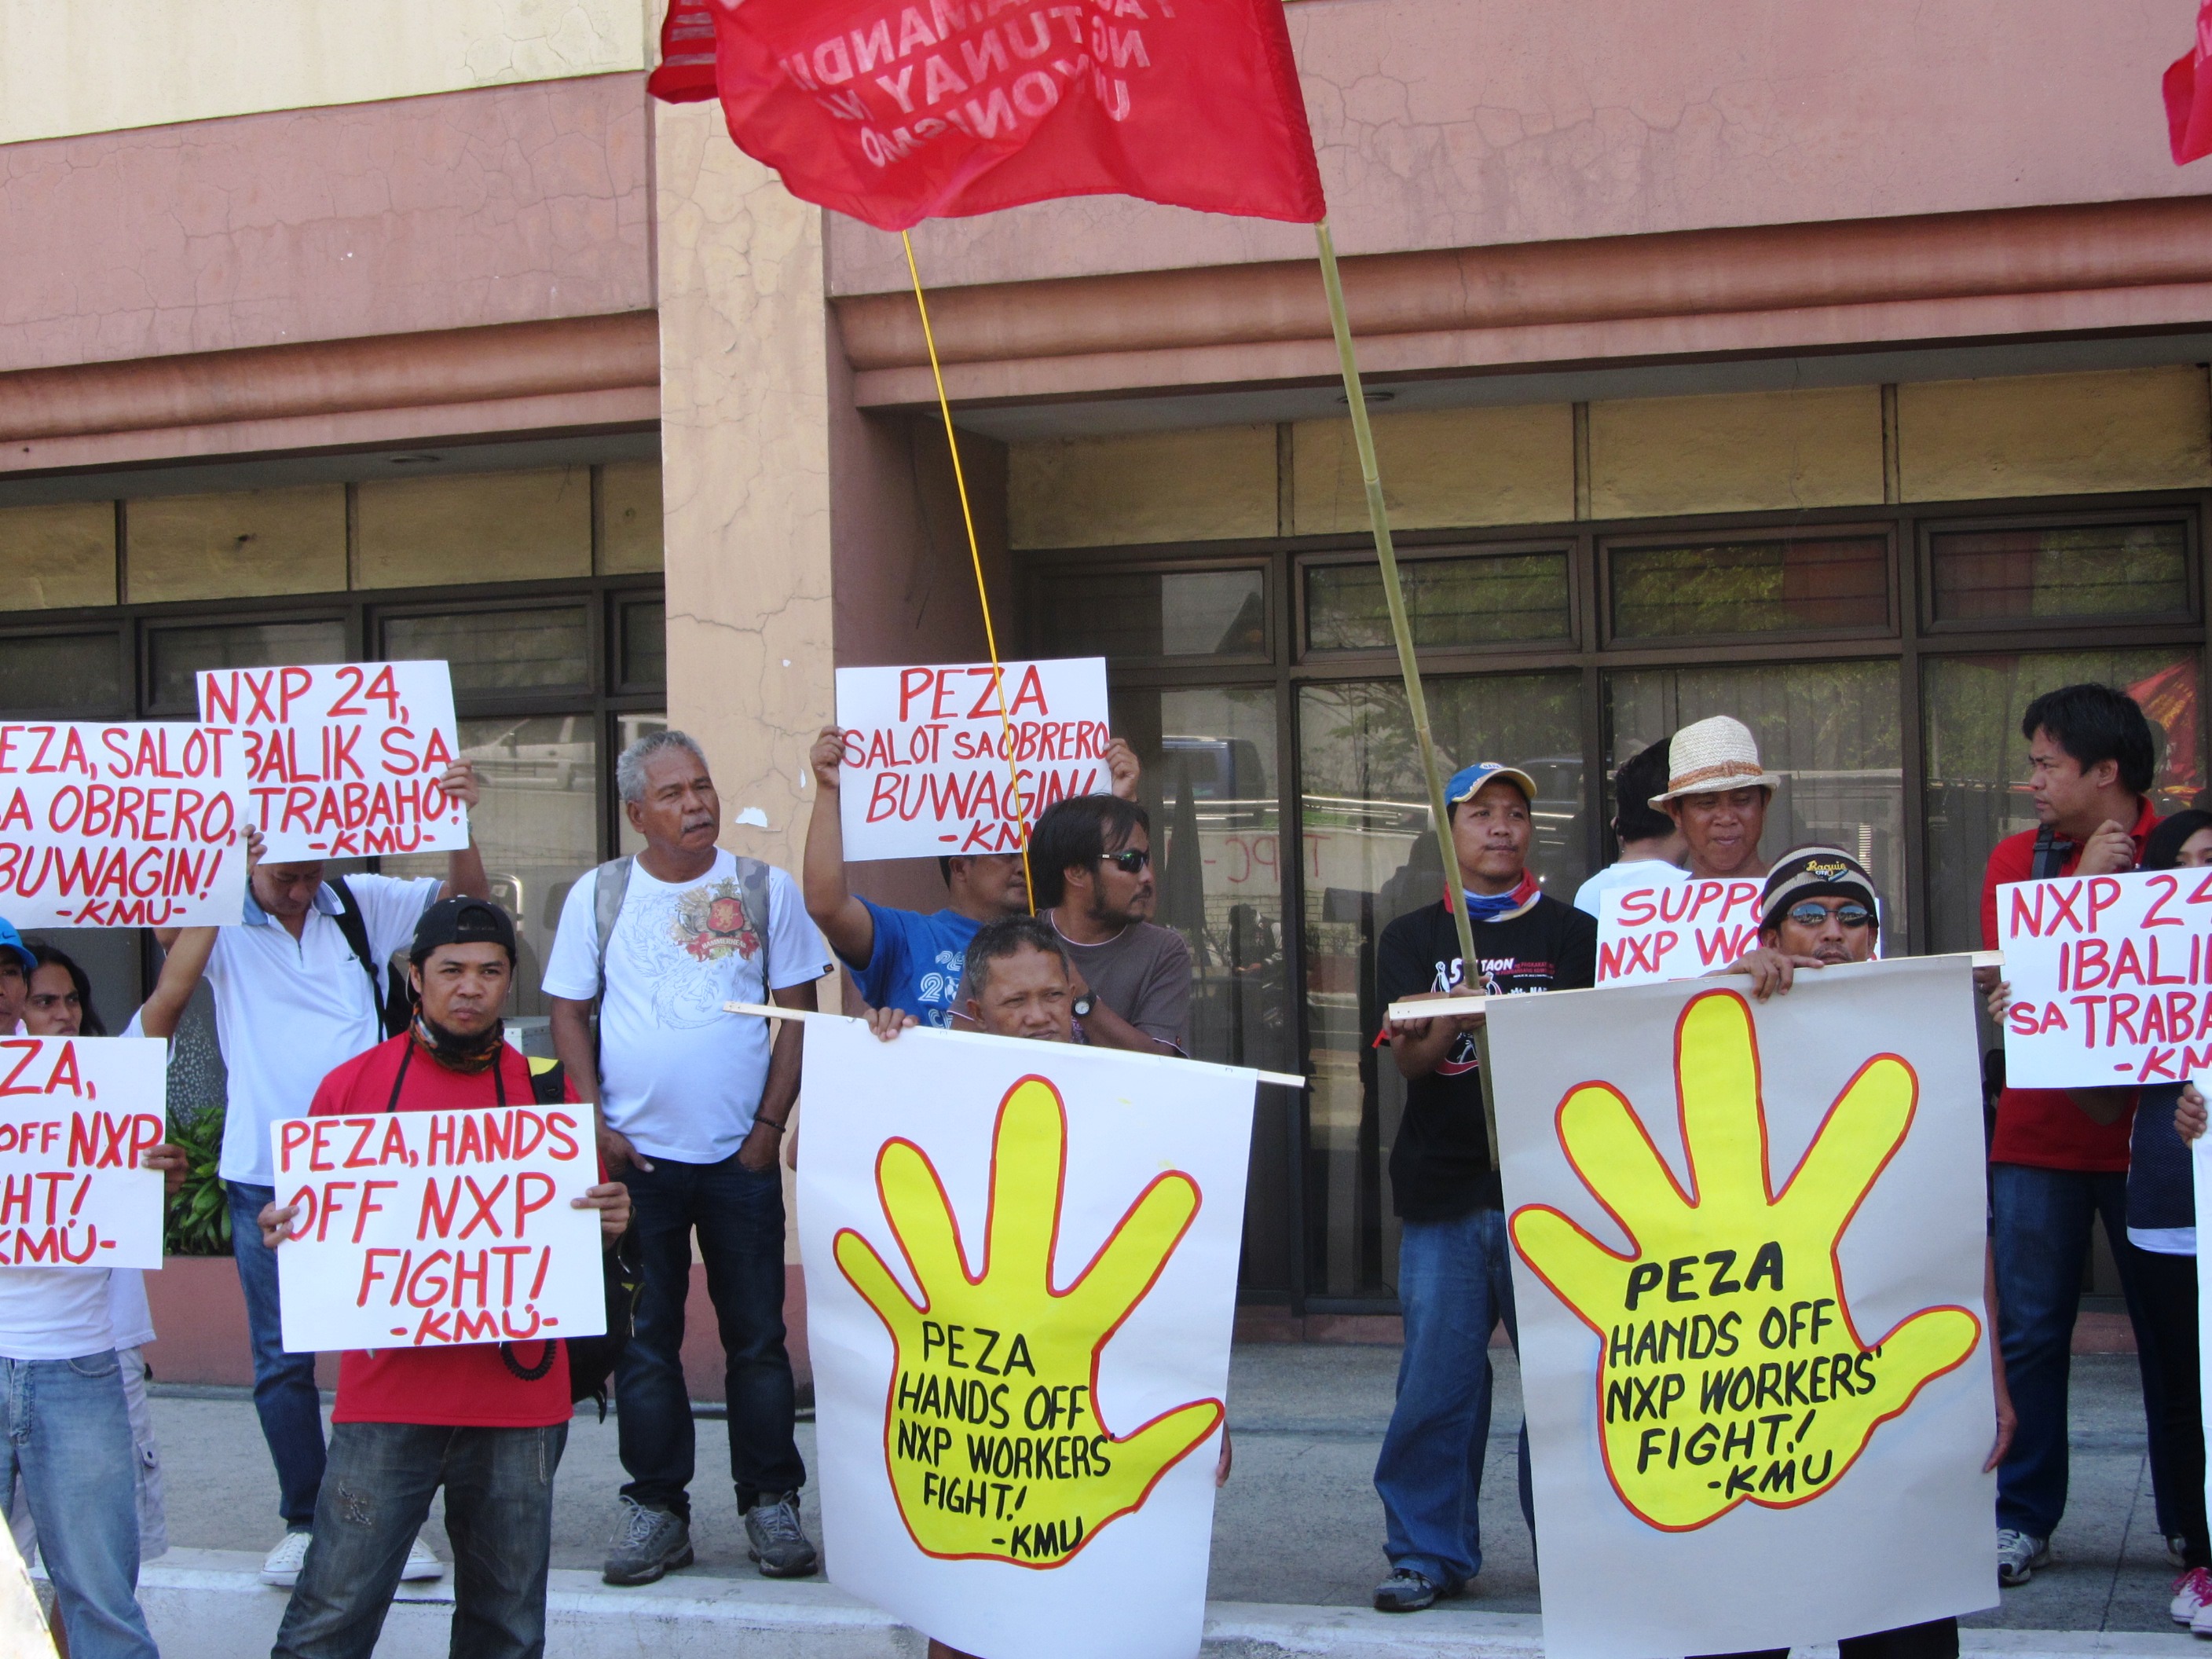 Workers denounce PEZA's creation of 'safe haven' for investors, May 12 (Photo by M. Salamat)